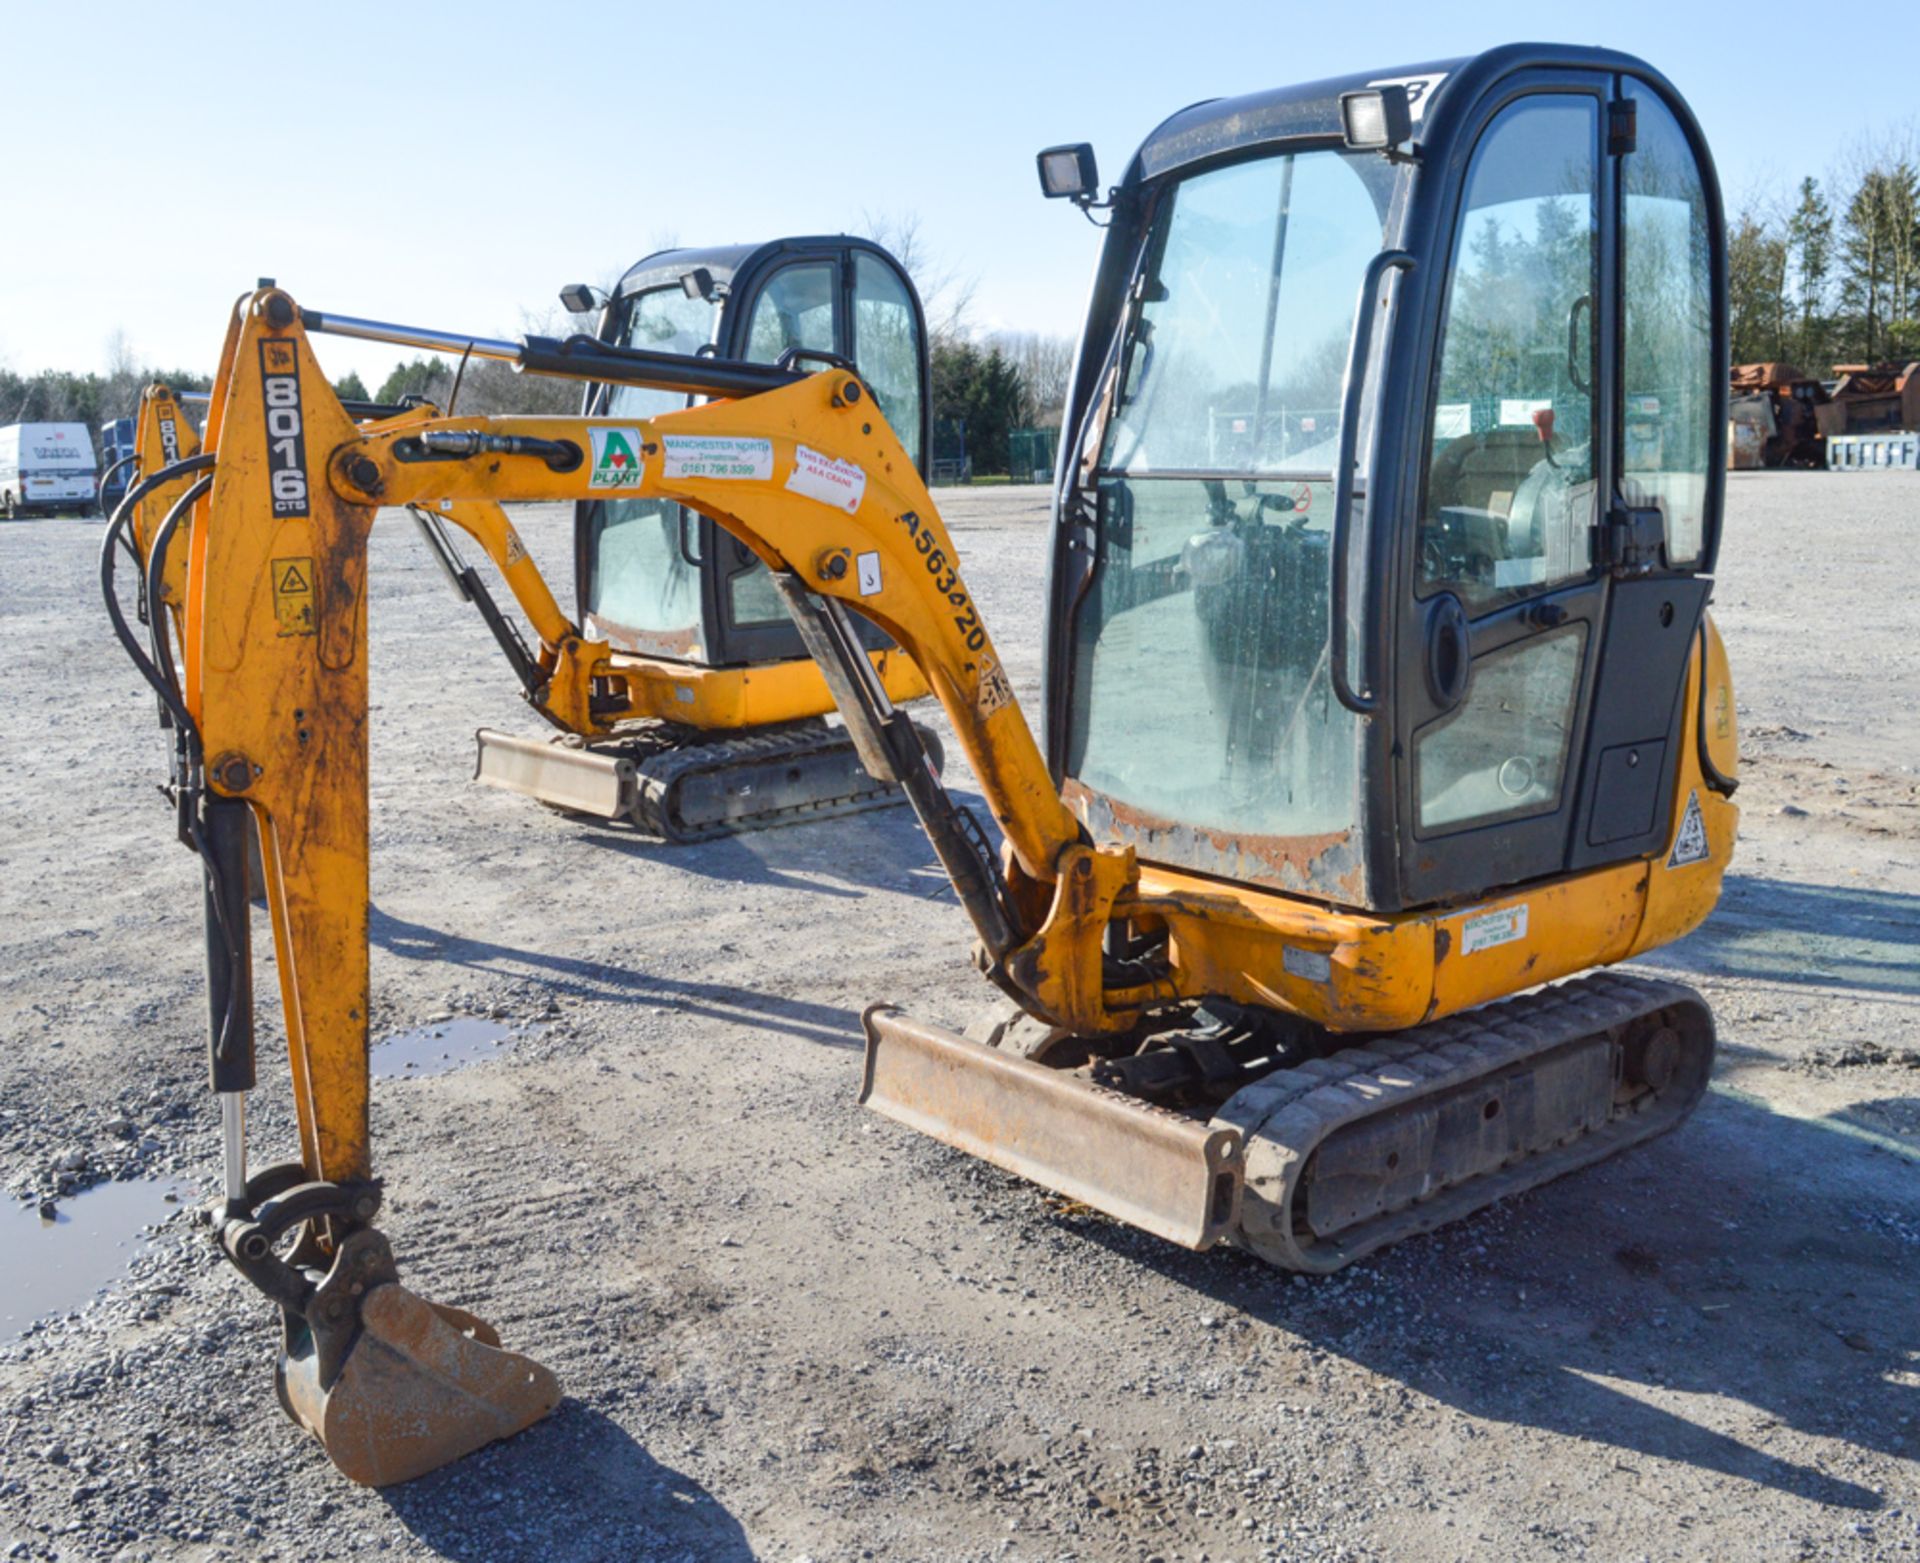 JCB 801.6 CTS 1.5 tonne rubber tracked mini excavator Year: 2011 S/N: 703925 Recorded Hours: 1680